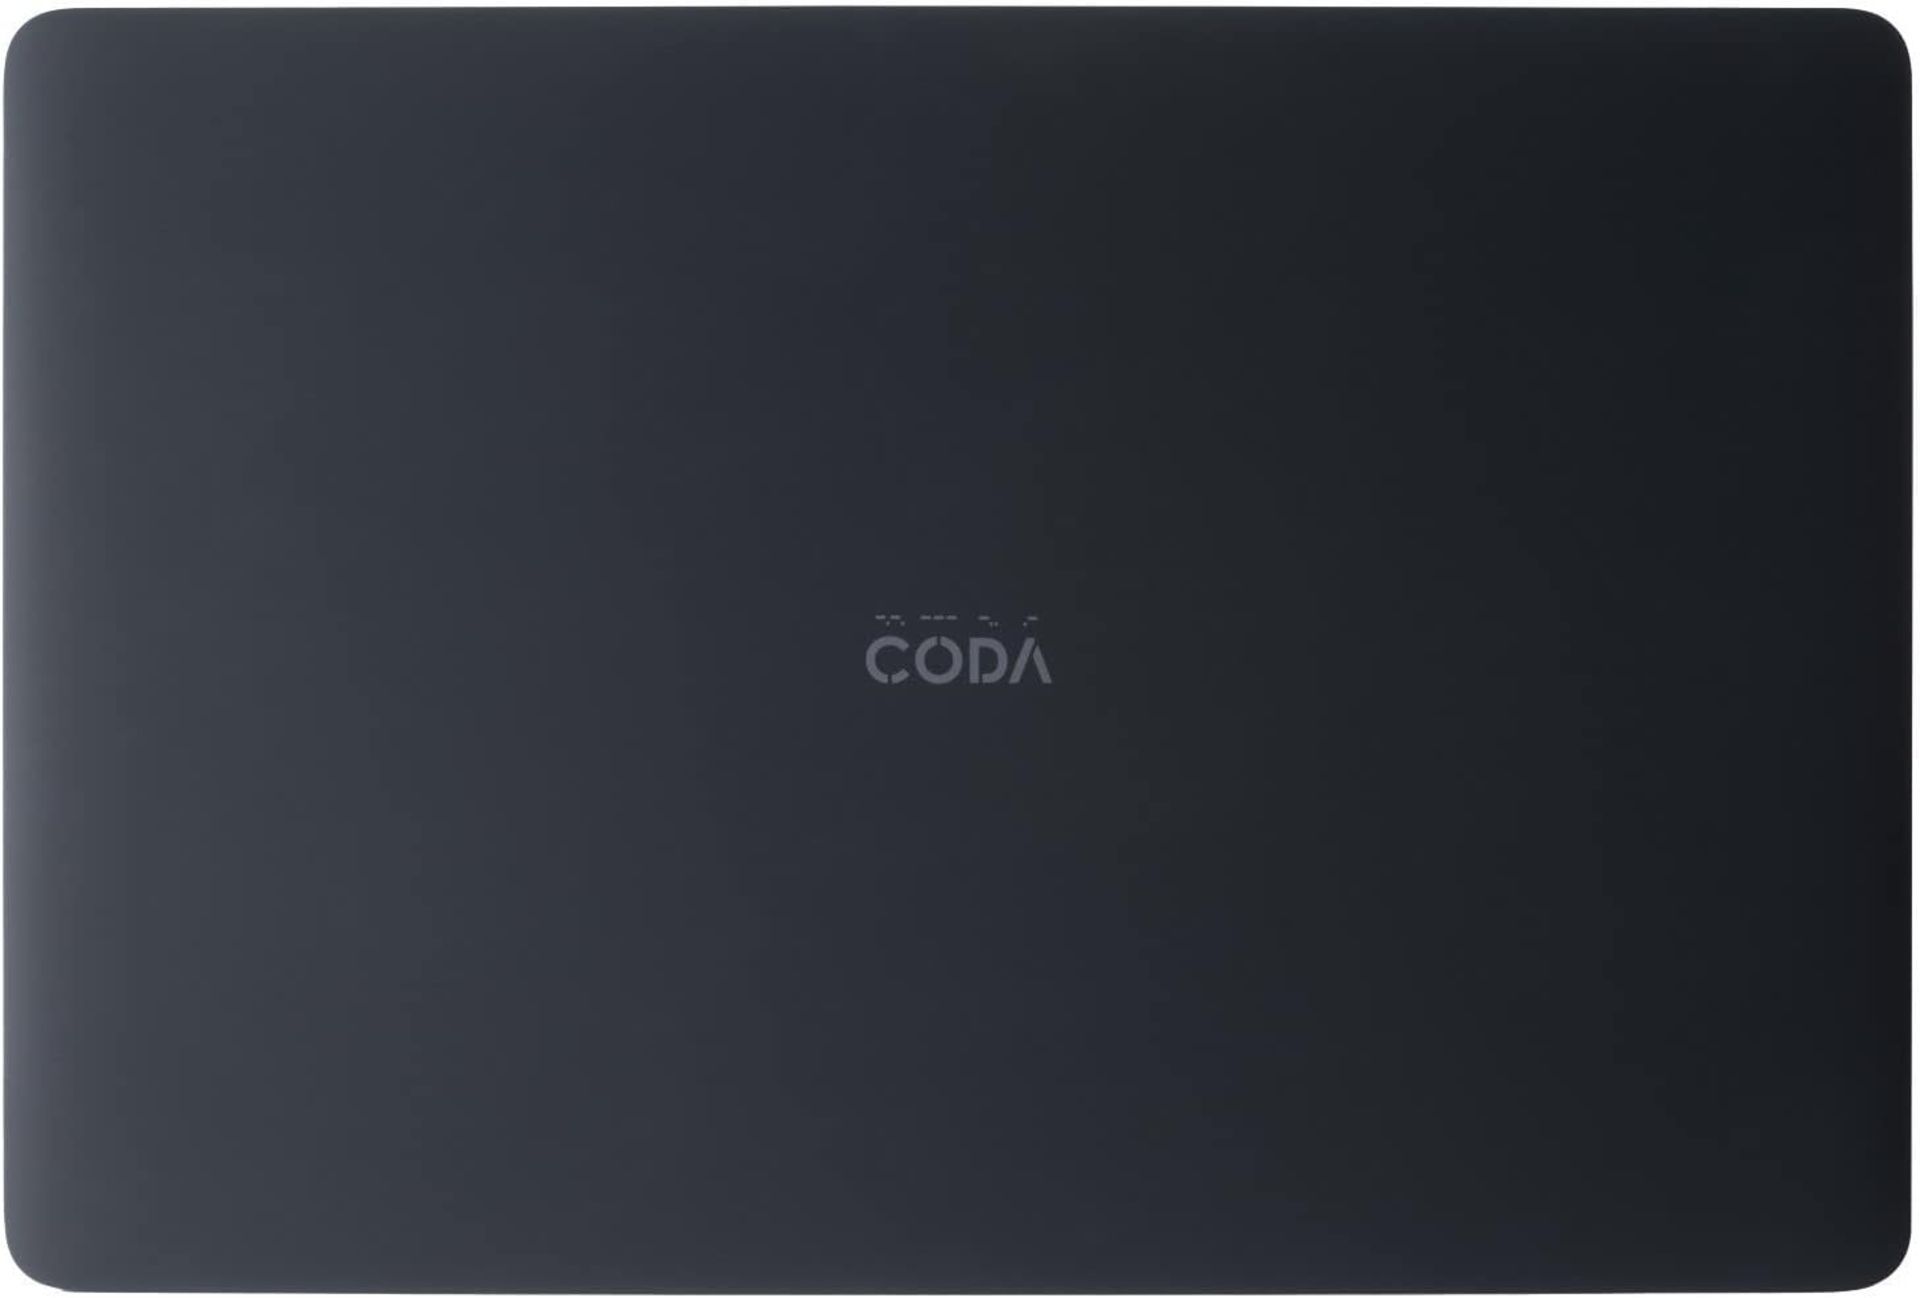 NEW & BOXED CODA 1.4 CODA043 14 Inch Laptop. RRP £199.99. (SR). Operating system Windows 10S, SSD - Image 7 of 7